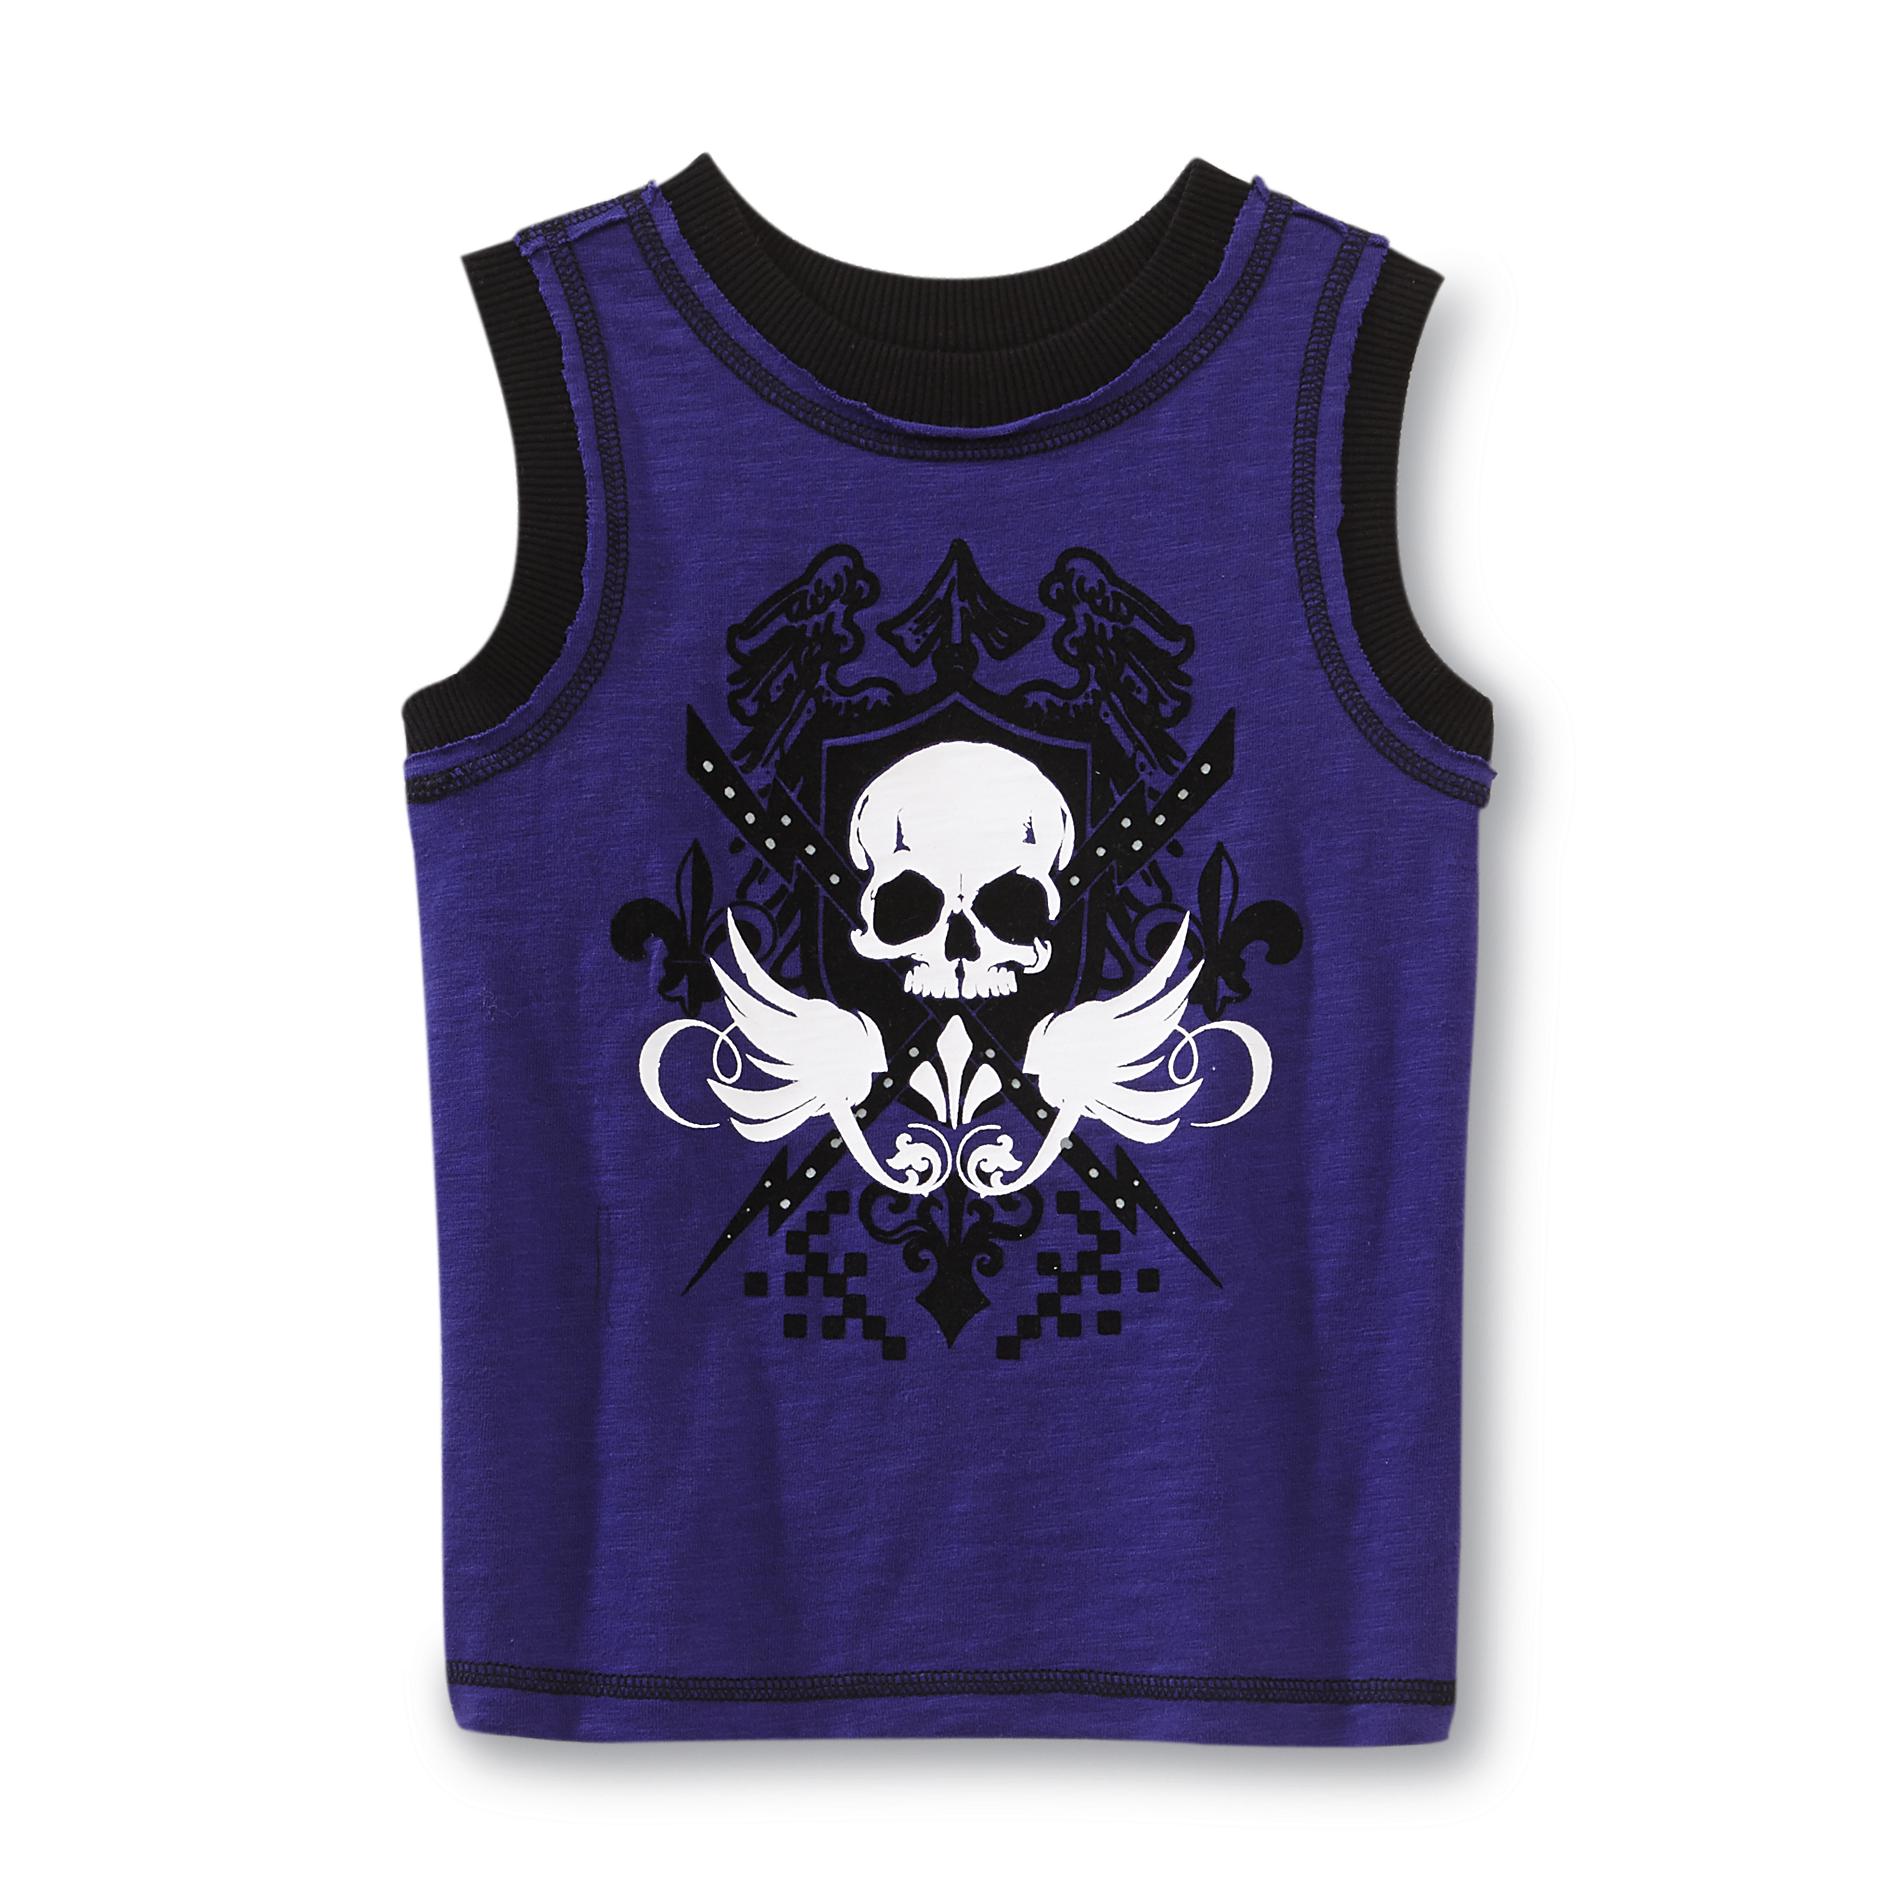 Sk2 Baby Toddler Boy's Graphic Muscle Tank - Skull